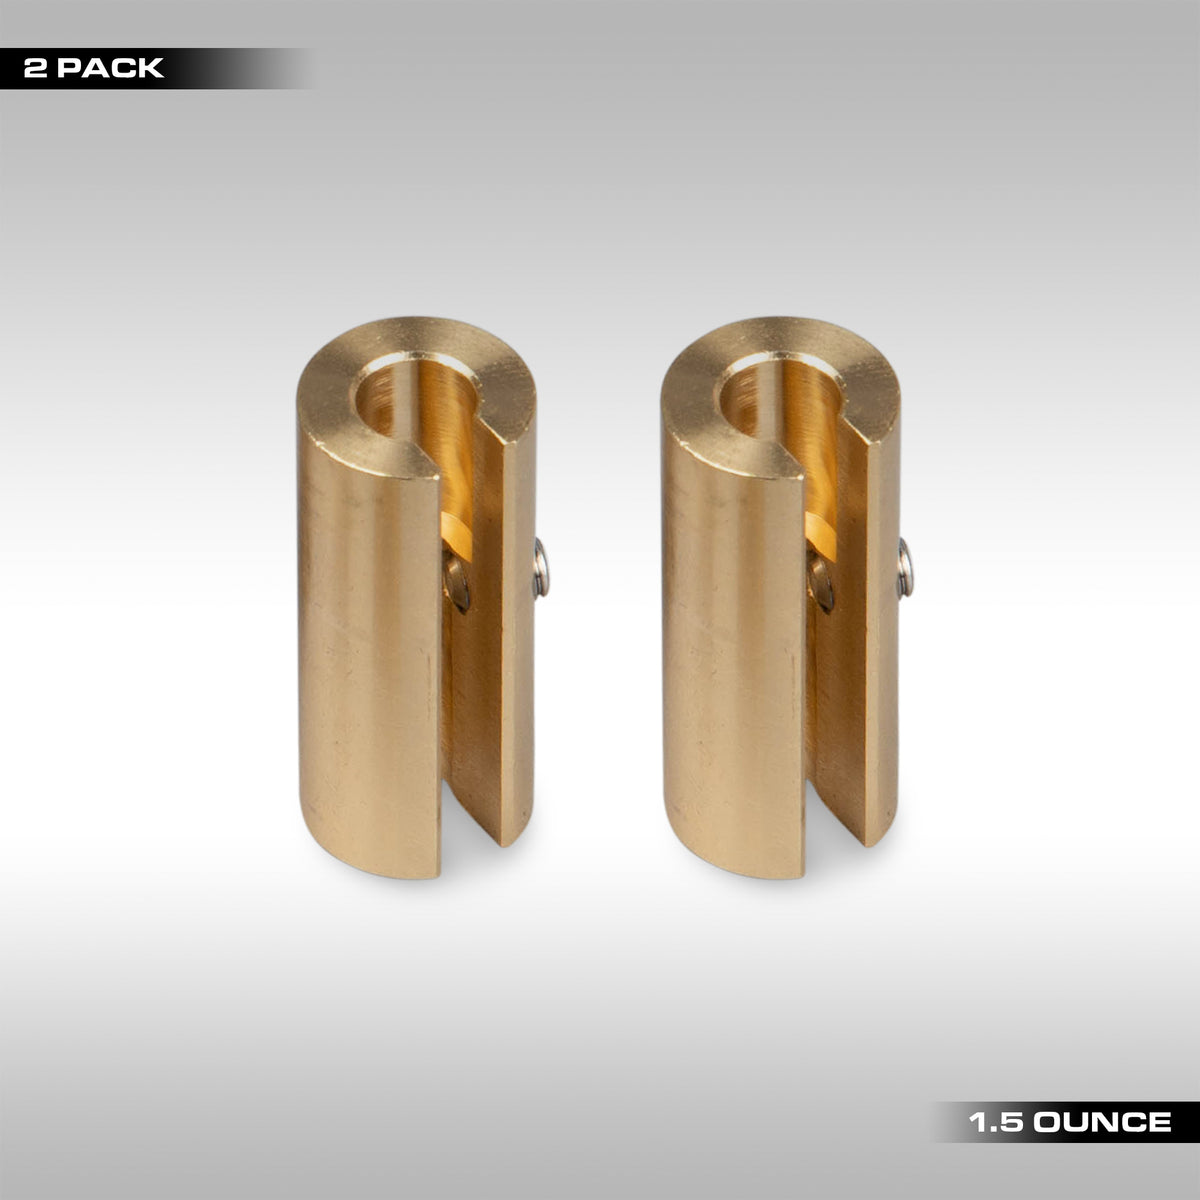 2 pack 1.5 ounce No-Mar wheel weights for balancing your motorcycle wheels. Machined brass weights are designed to lock onto the spokes with a set screw letting you get the perfect balance for your wheels. No Mar motorcycle wheel weights.